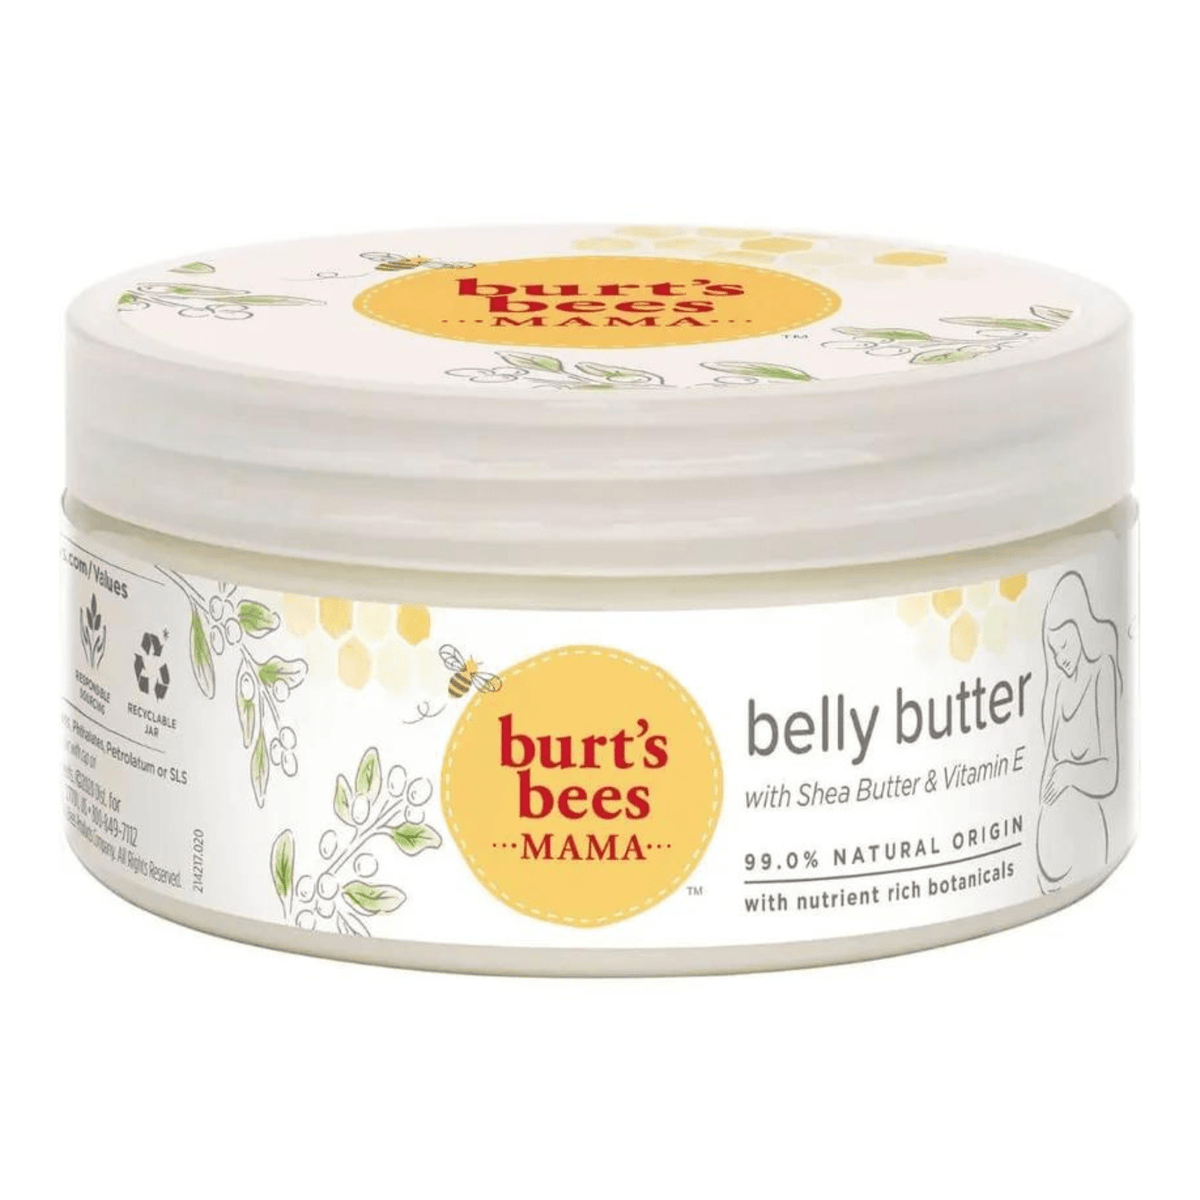 Primary Image of Mama Bee Belly Butter